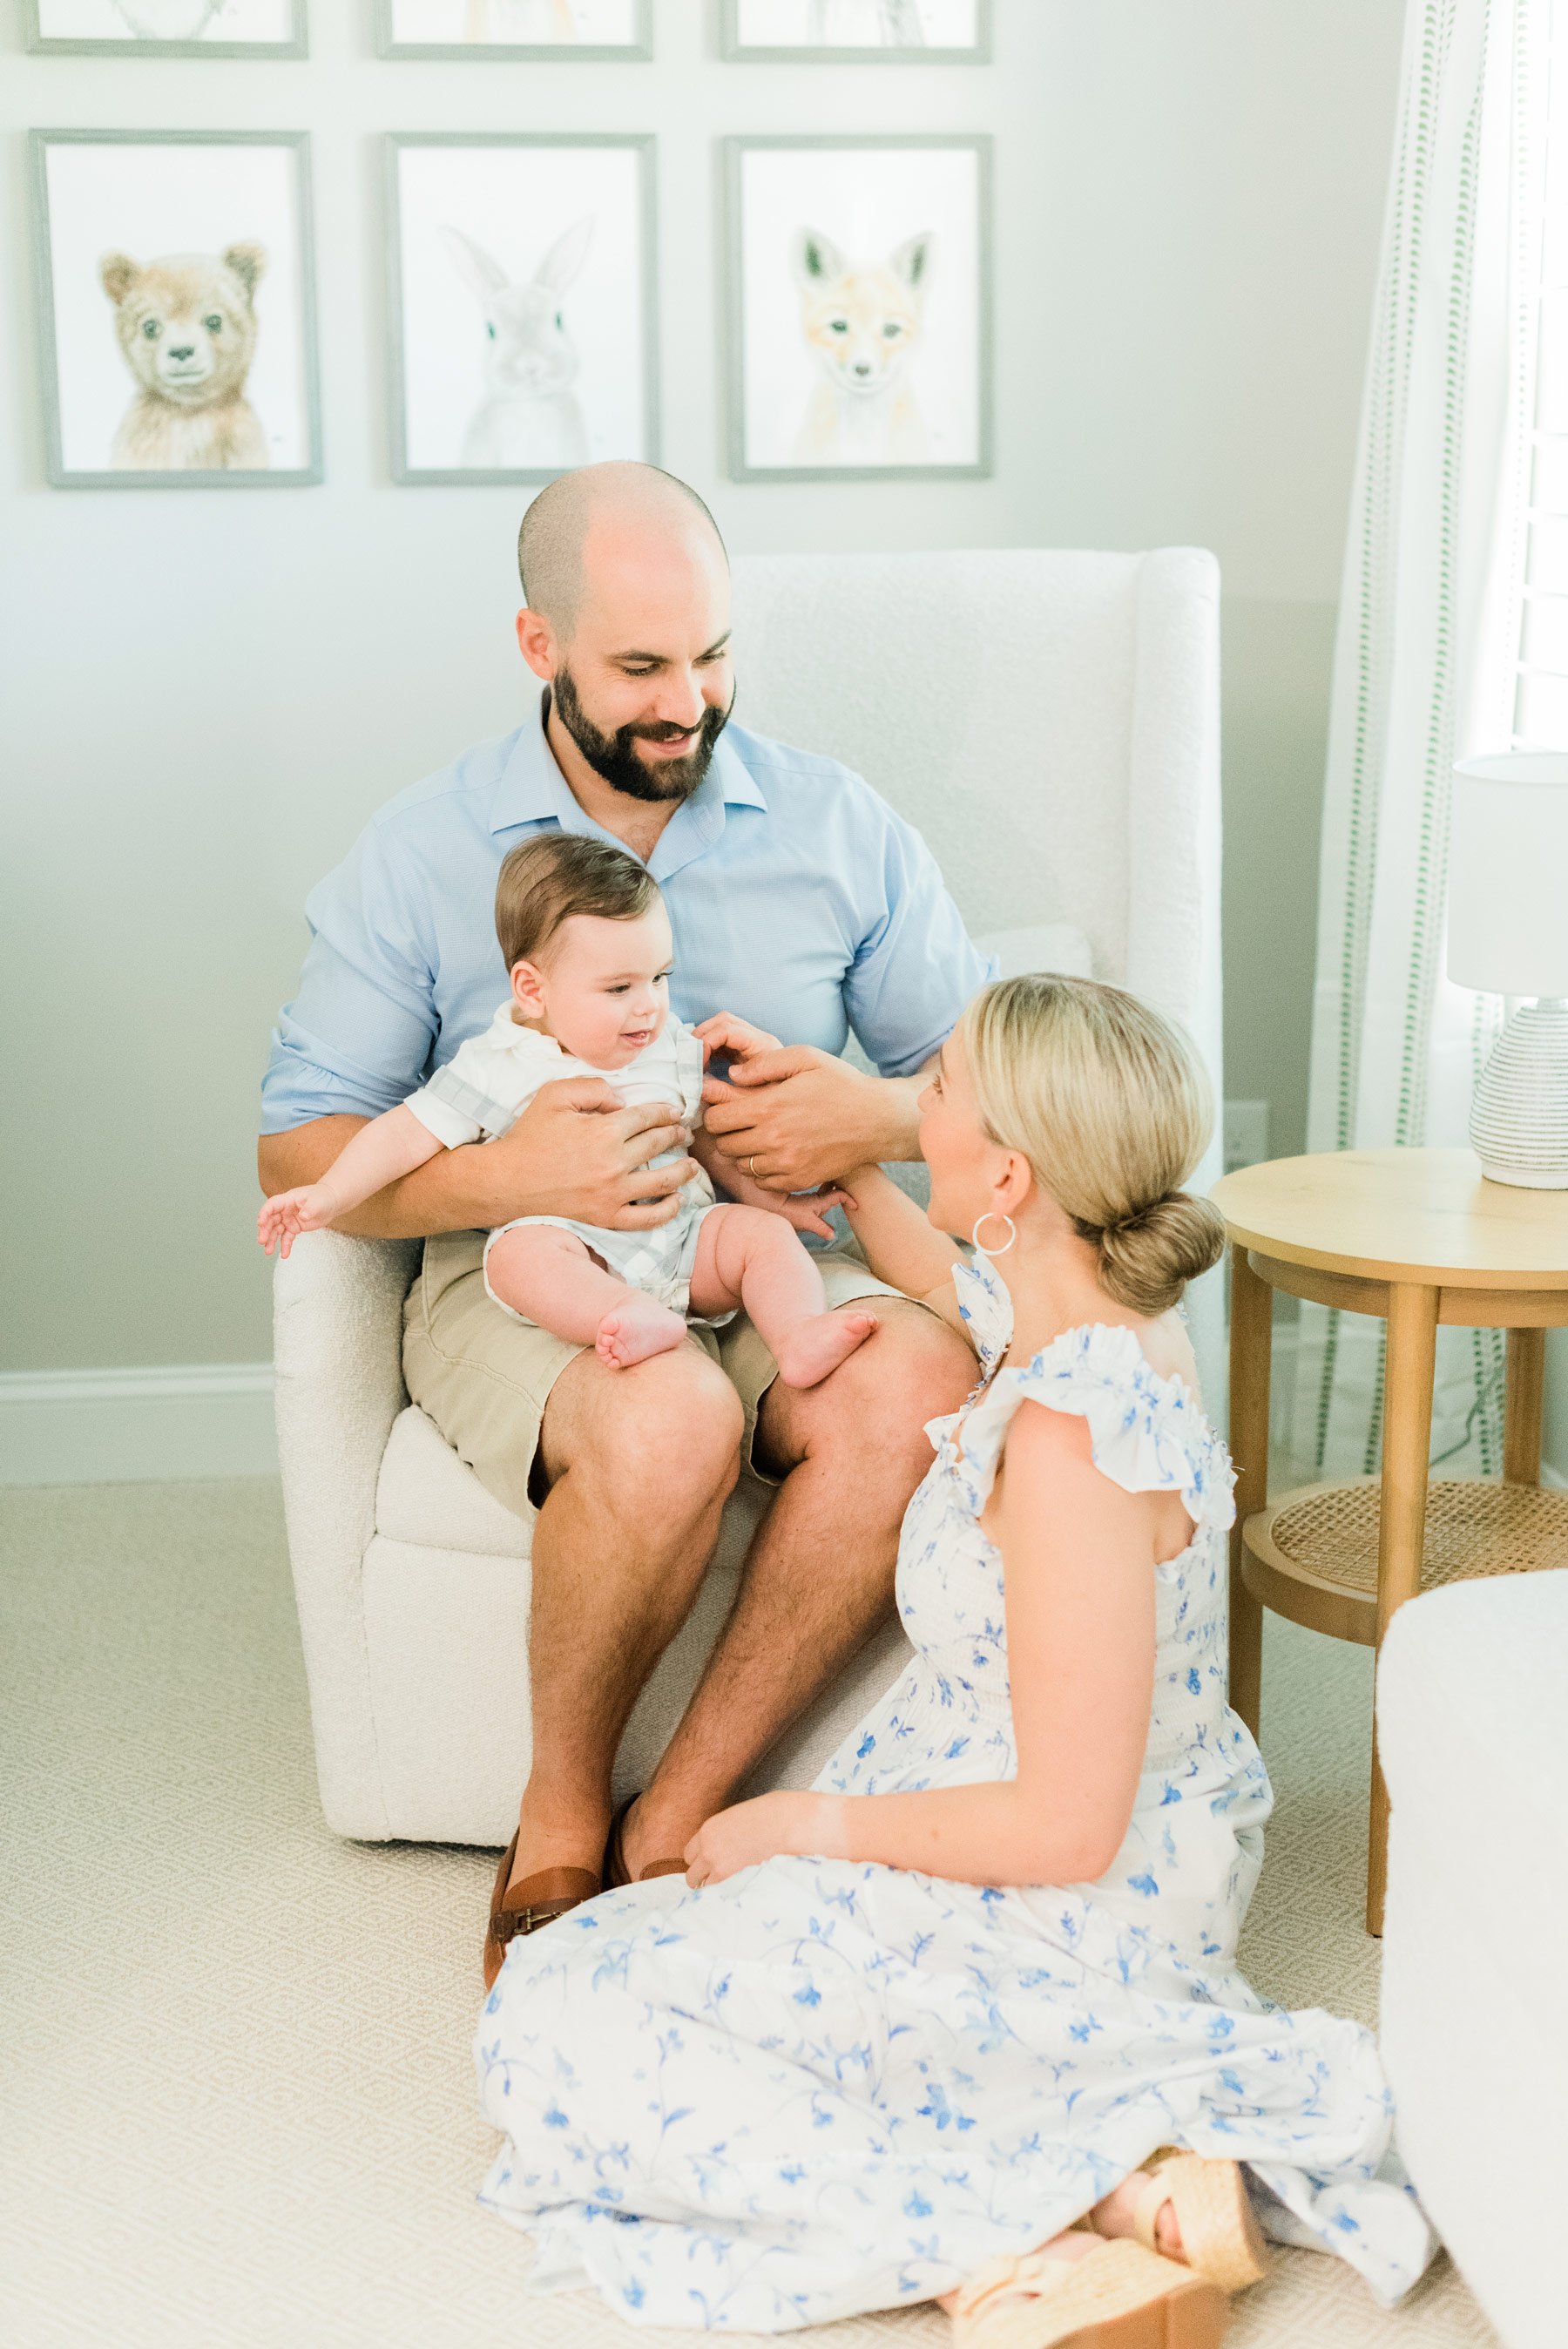  The cutest mom sits on the floor and gazes up at her husband and son during a Jacquie Erickson photography session. Soft blue outfit inspiration.&nbsp; #inhomeportraitsessions #familyphotos #portraitphotography #atlantaphotographer #jacquieerickson 